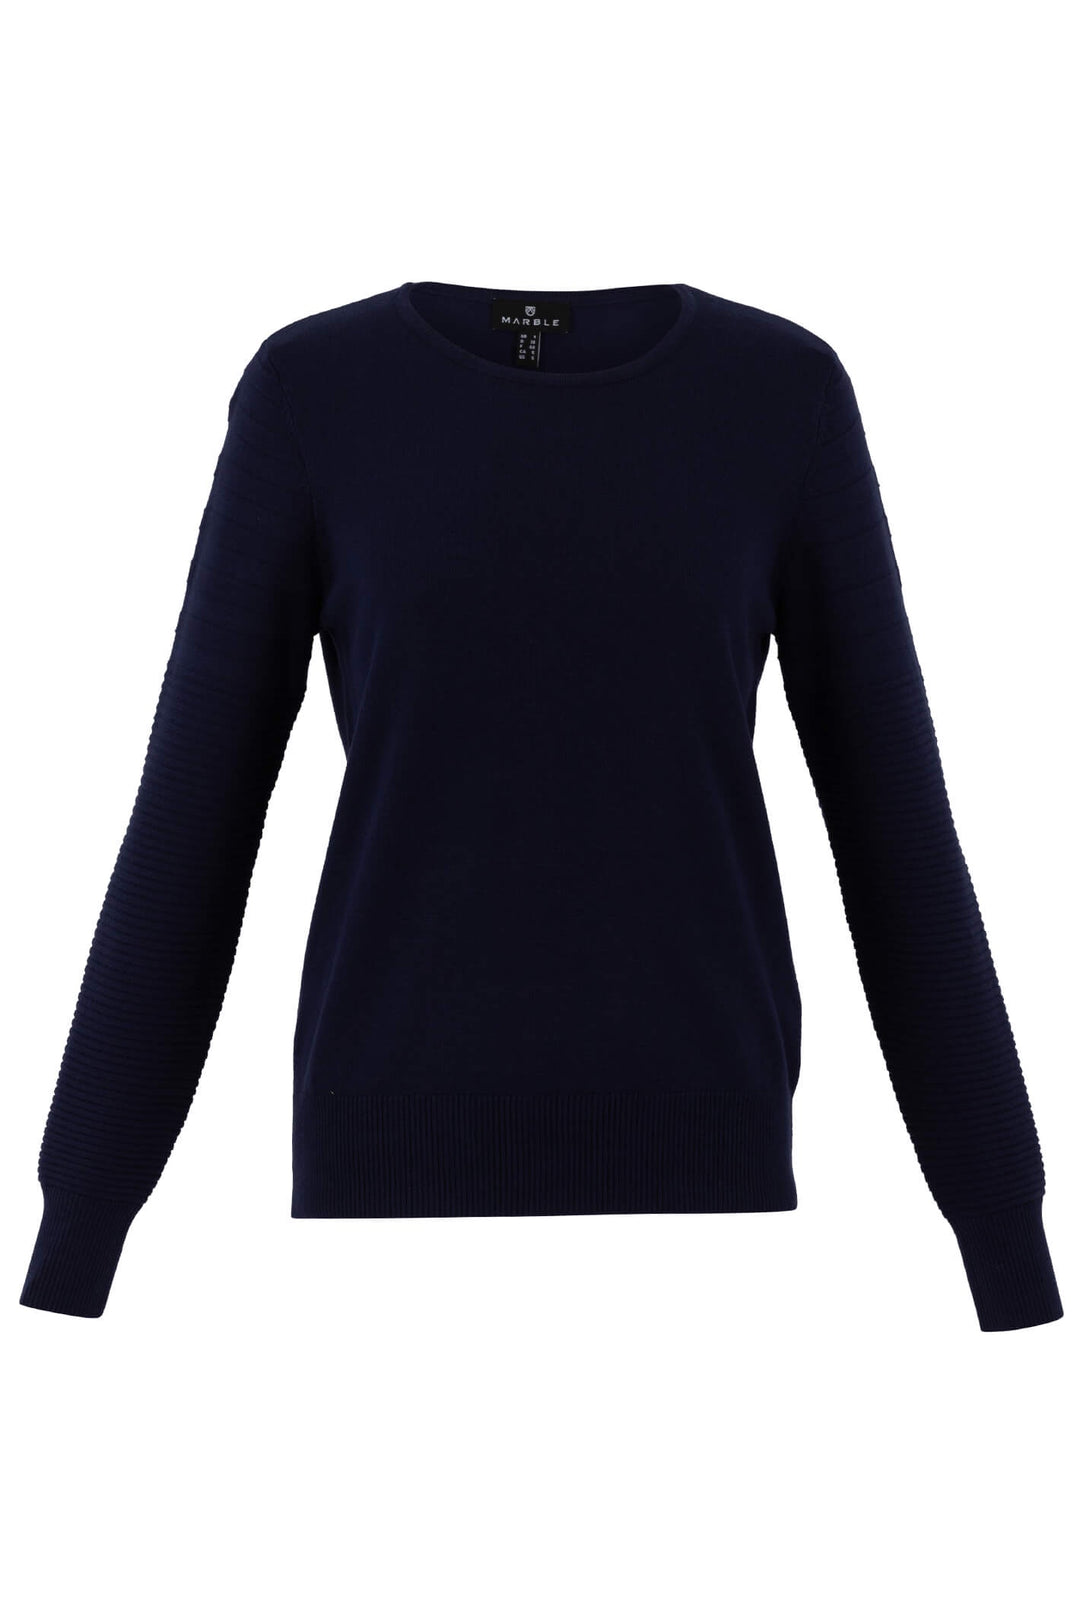 Marble 7102 103 Navy Ribbed Sleeve Jumper - Dotique